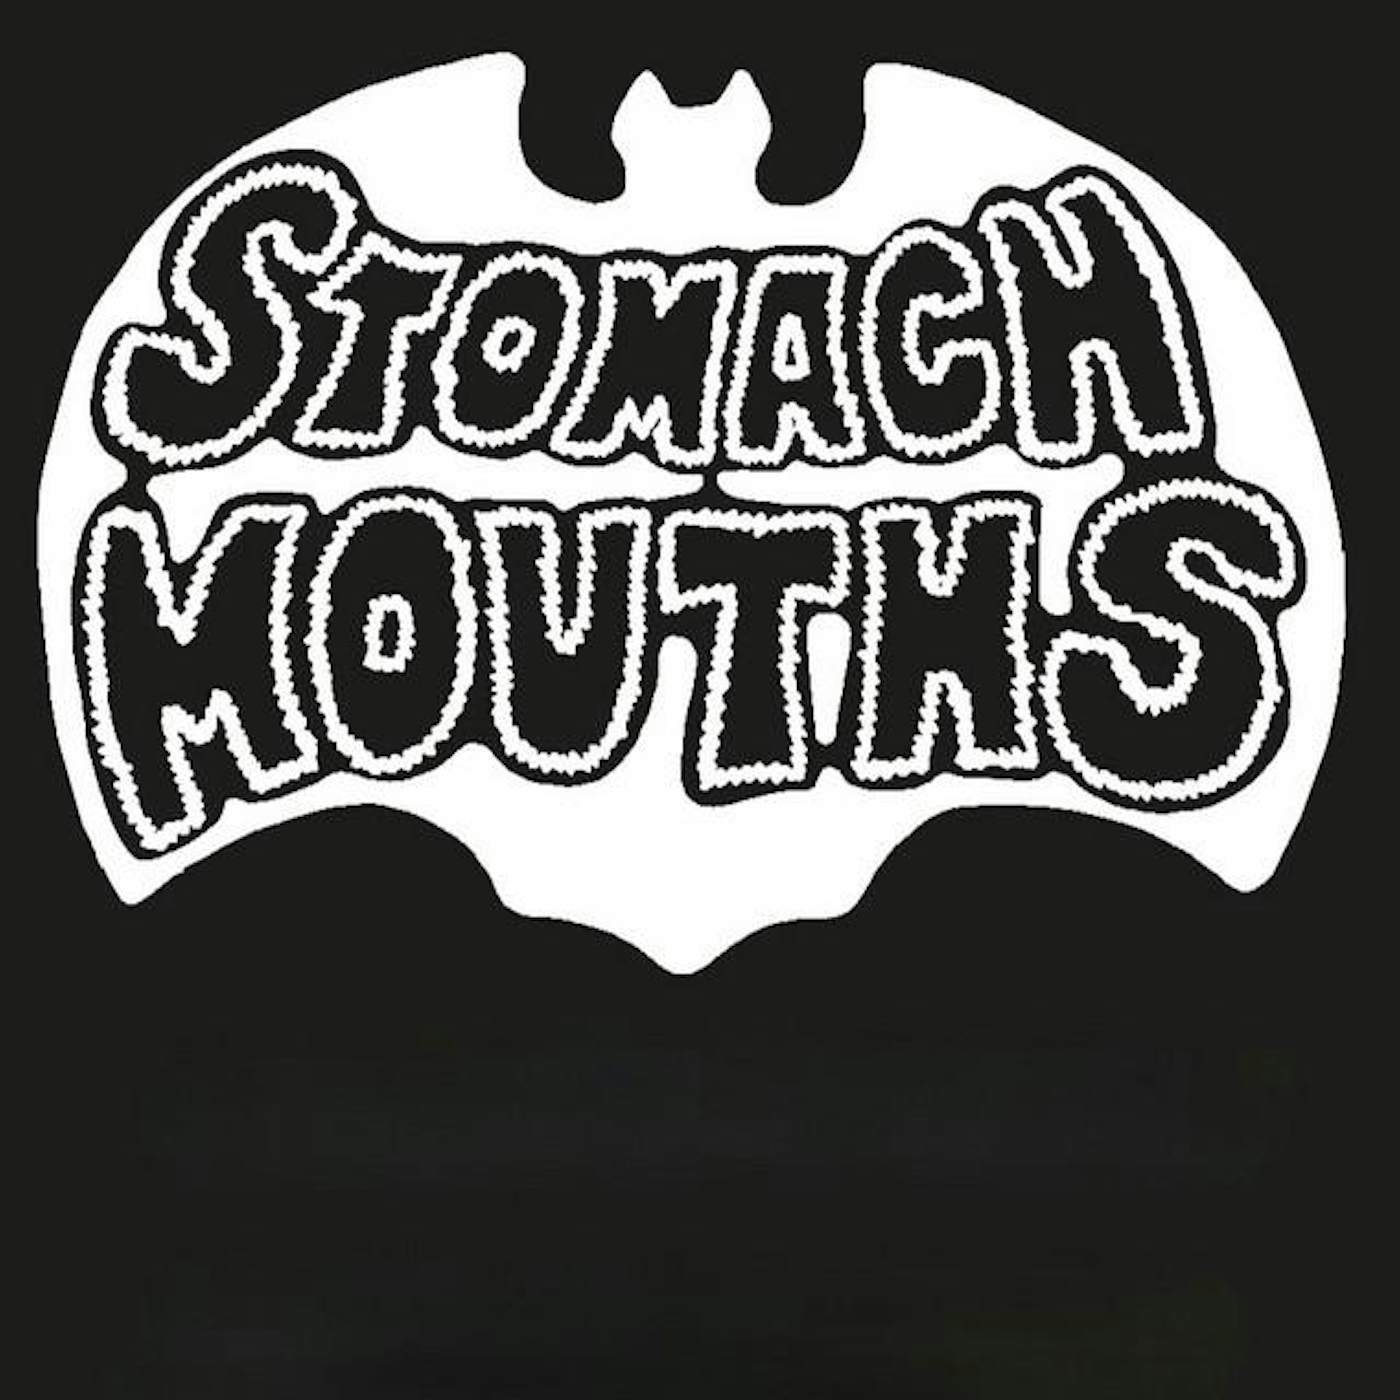 Stomachmouths